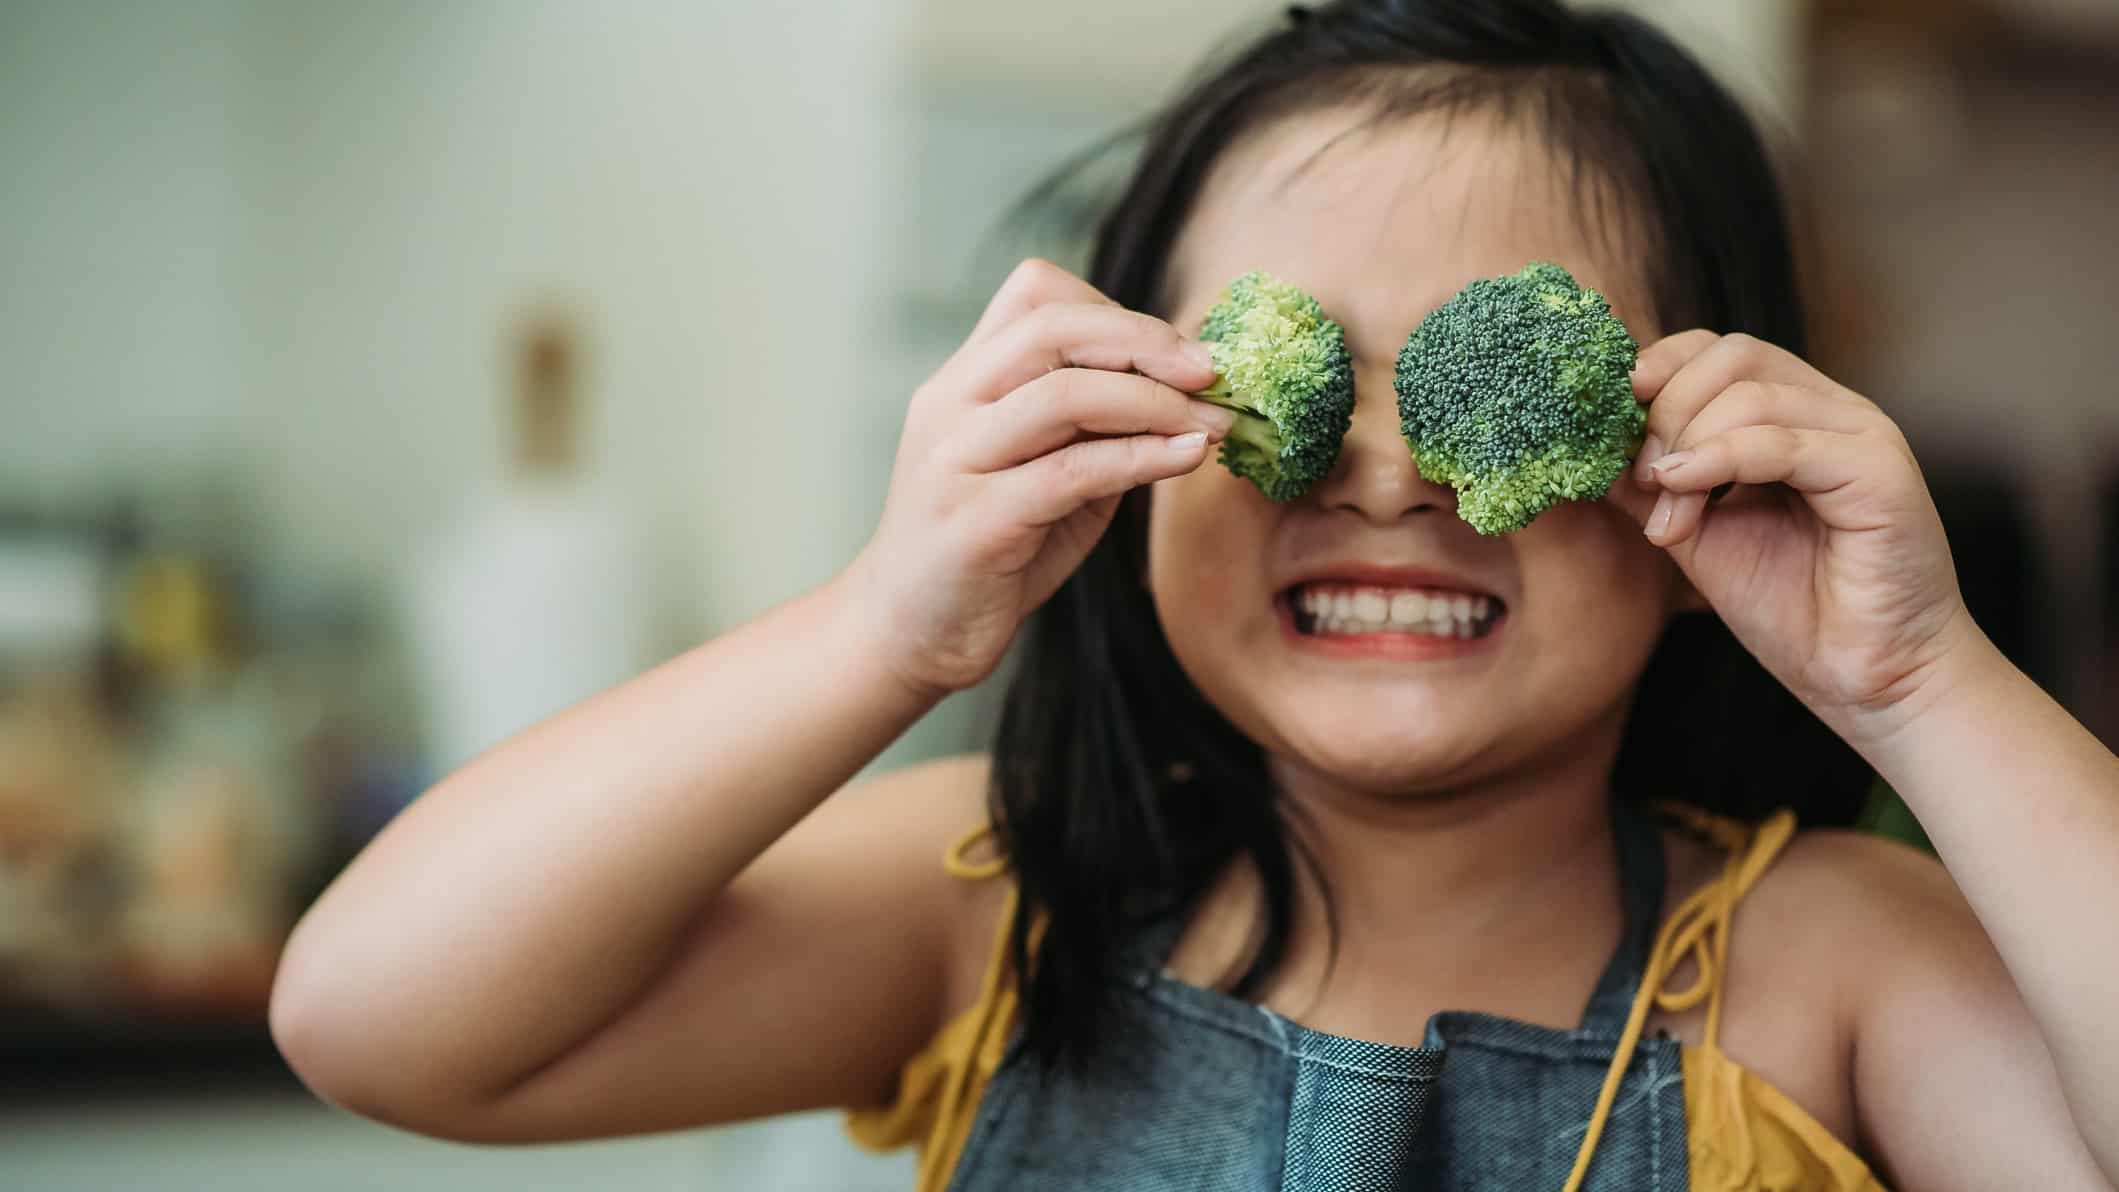 A little girl holds broccoli over her eyes with a big happy smile.